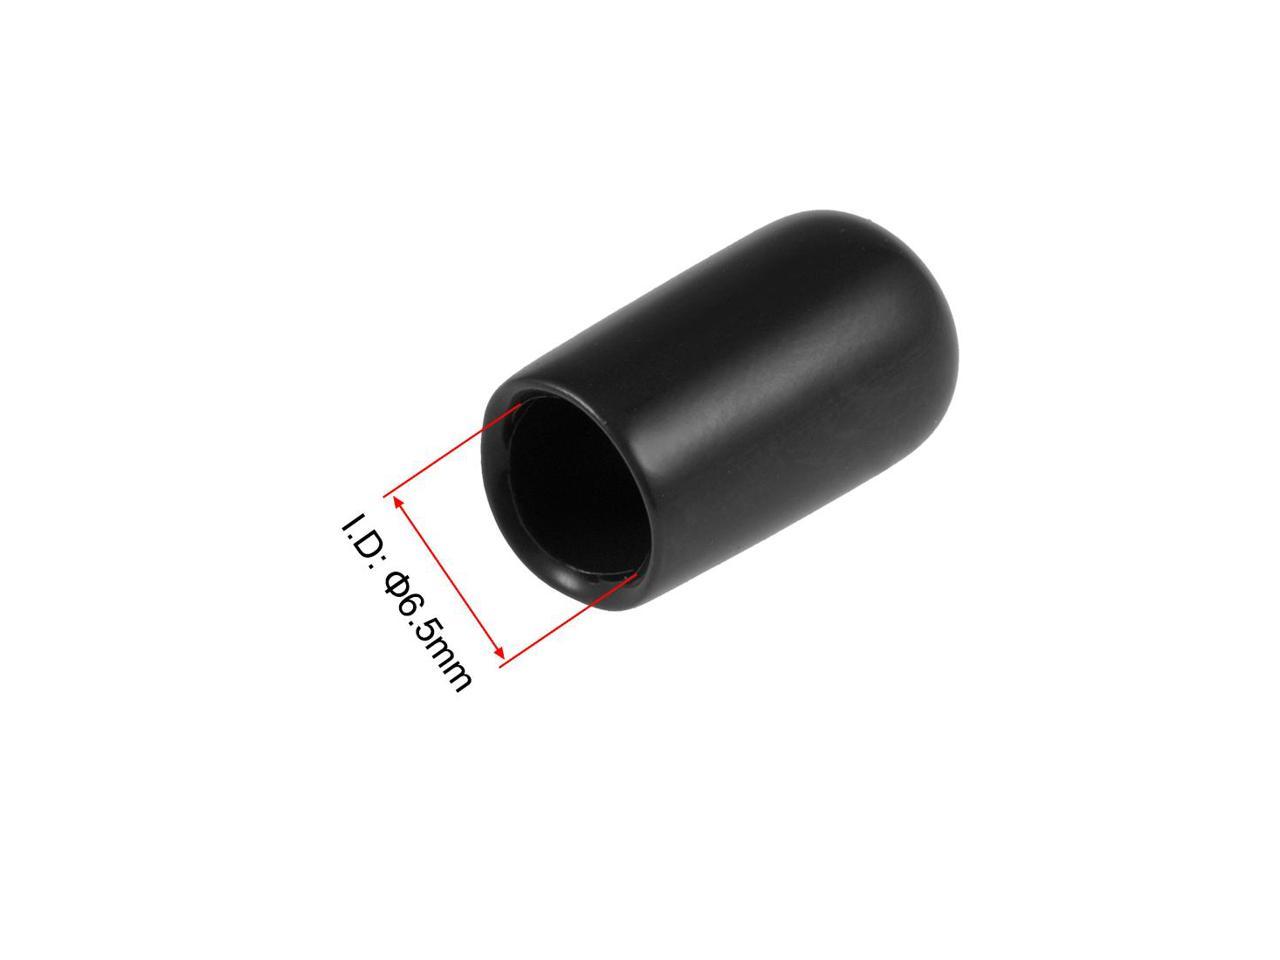 7.5mm ID Screw Thread Protectors Rubber Round end Cap Cover Black Flexible Tube caps Tube tip 100 Pieces 